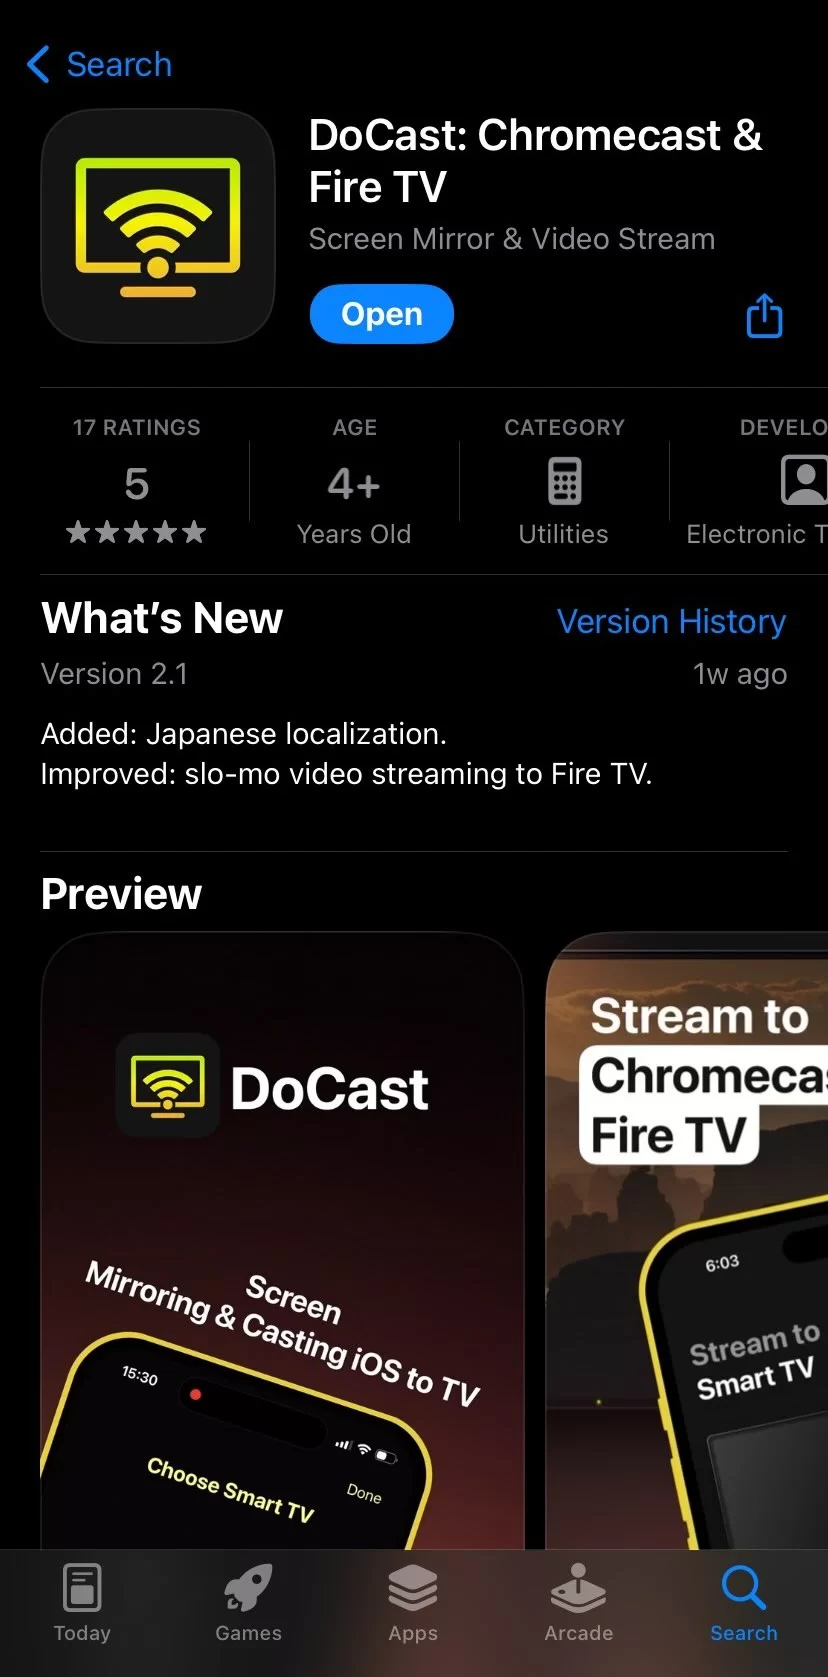 Download the DoCast app from the App Store